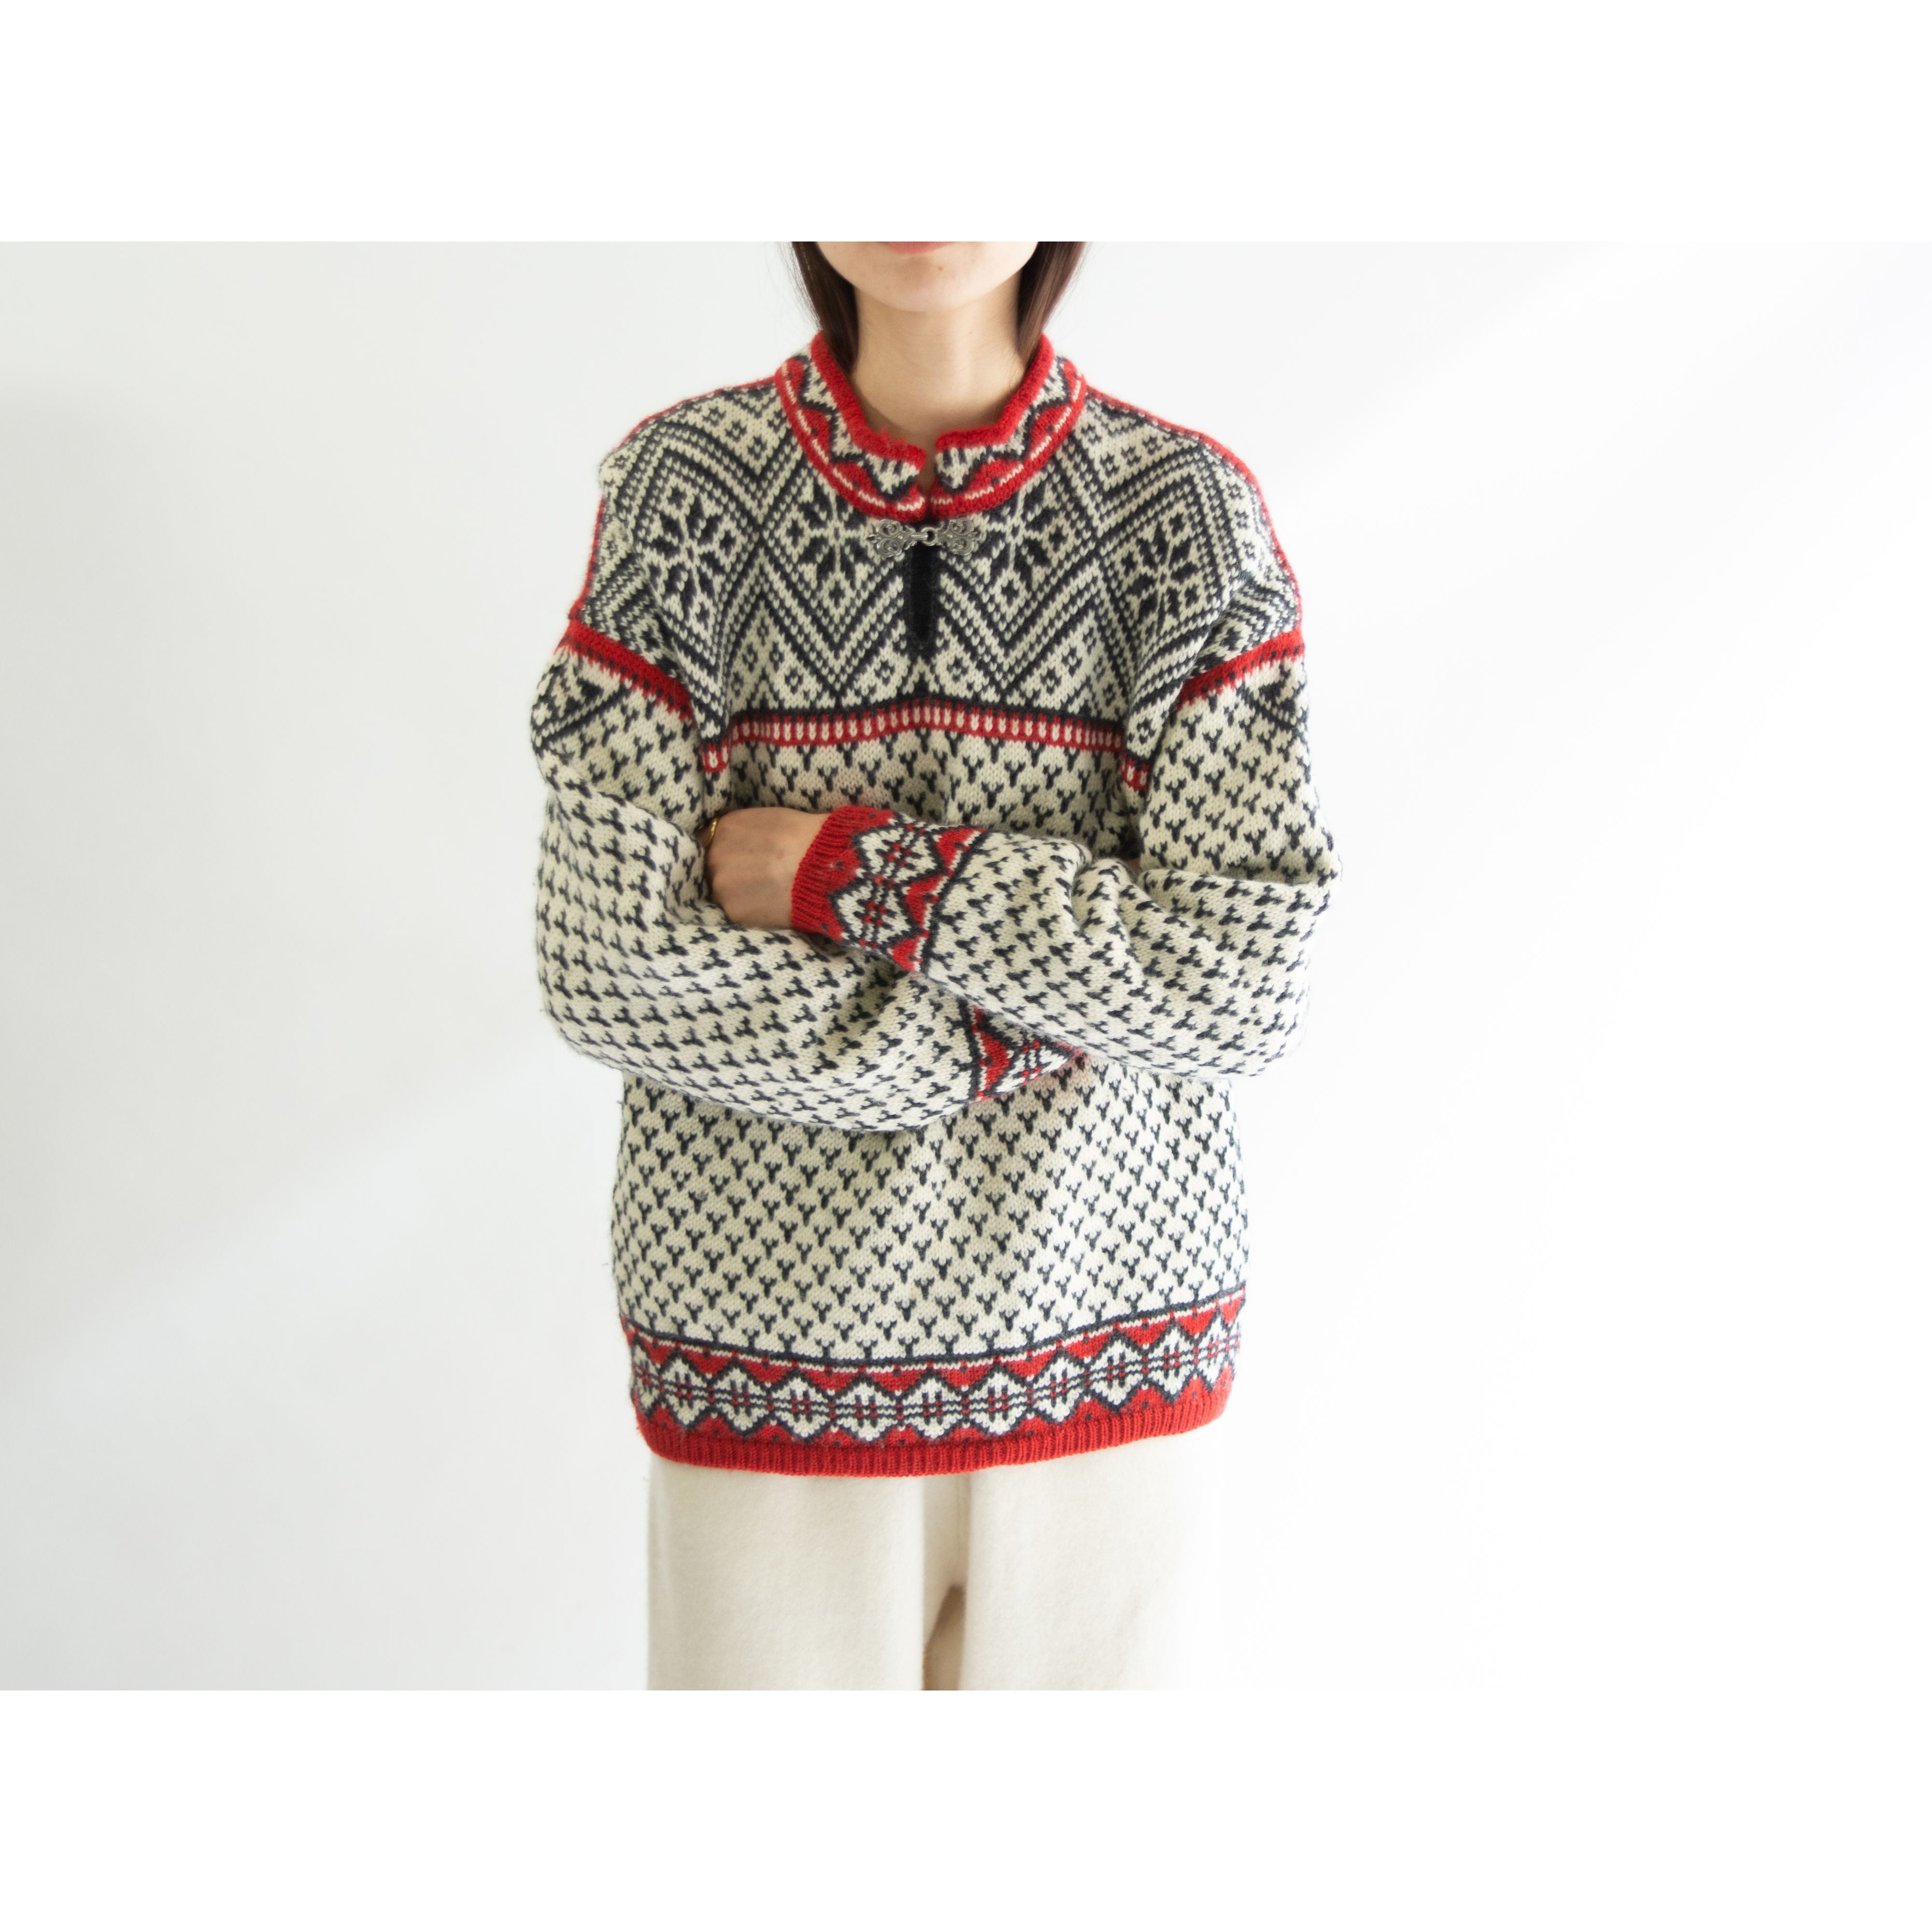 DALE OF NORWAY】Made in Norway 100% wool Nordic sweater（ダーレ 